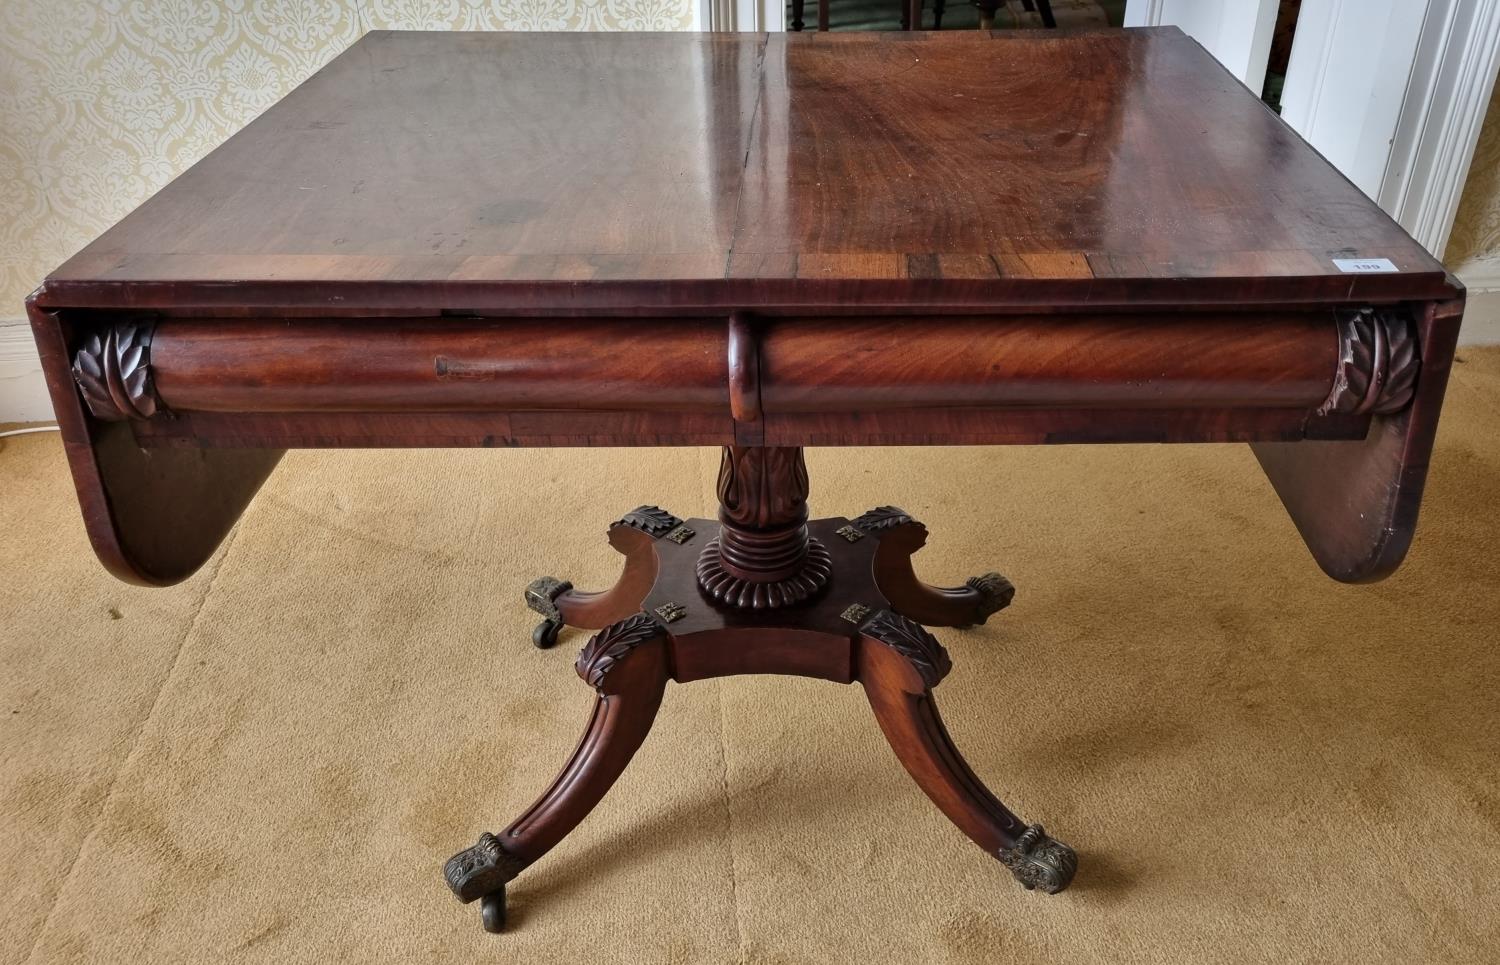 A Magnificent Irish early Regency Mahogany Sofa Table with rosewood crossbanding and carved acanthus